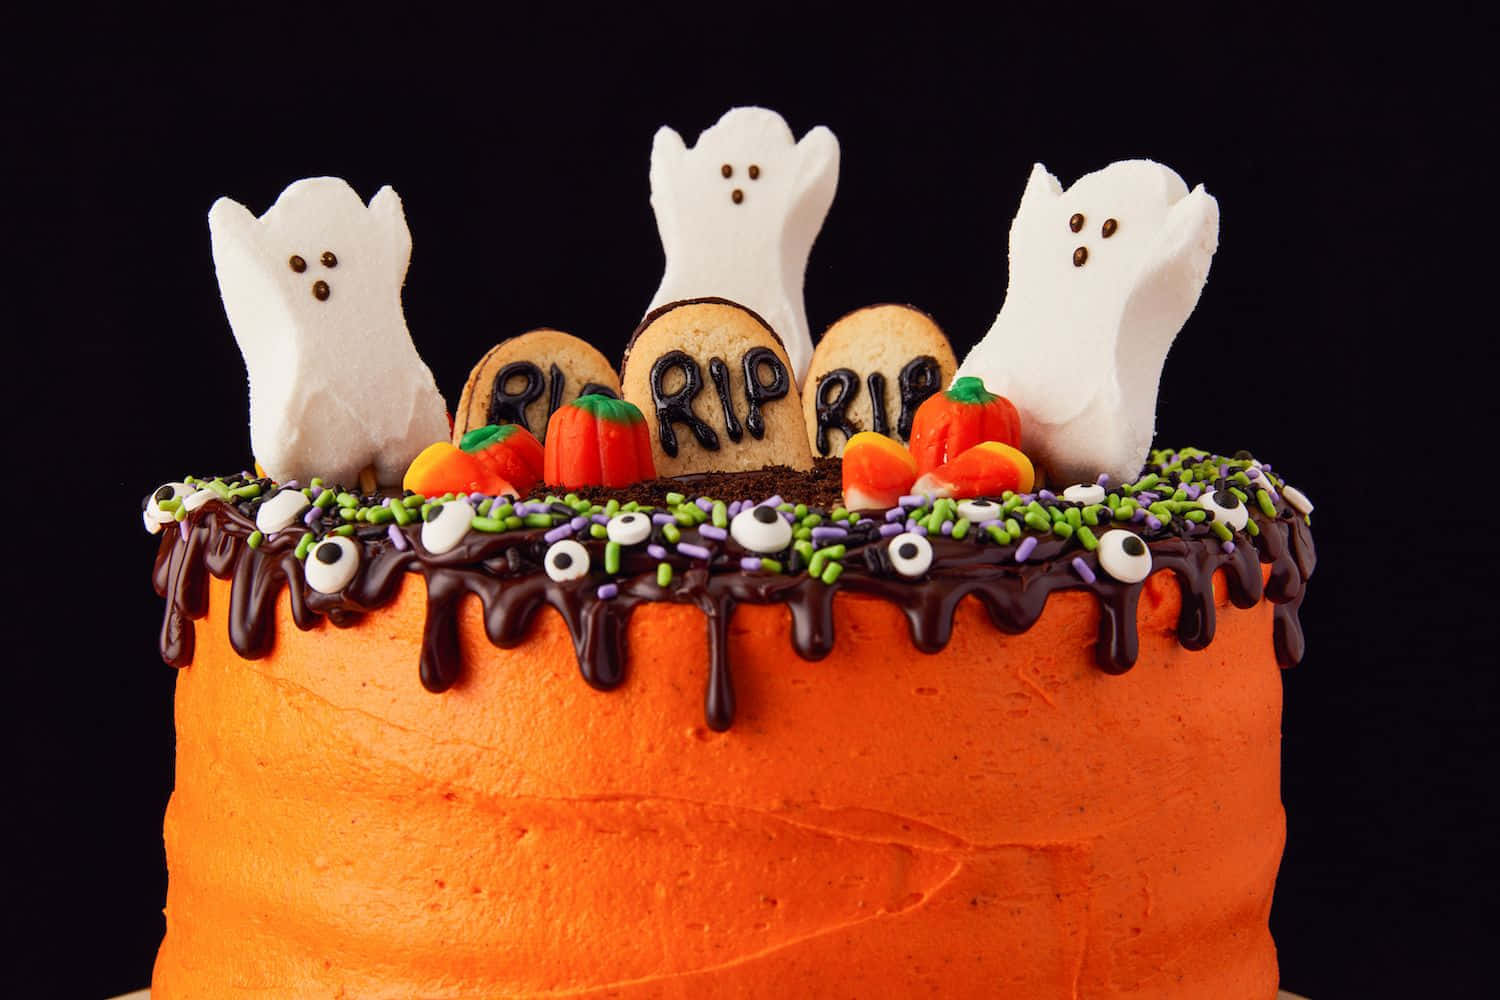 "Surprise Everyone with a Spooky Halloween Cake" Wallpaper